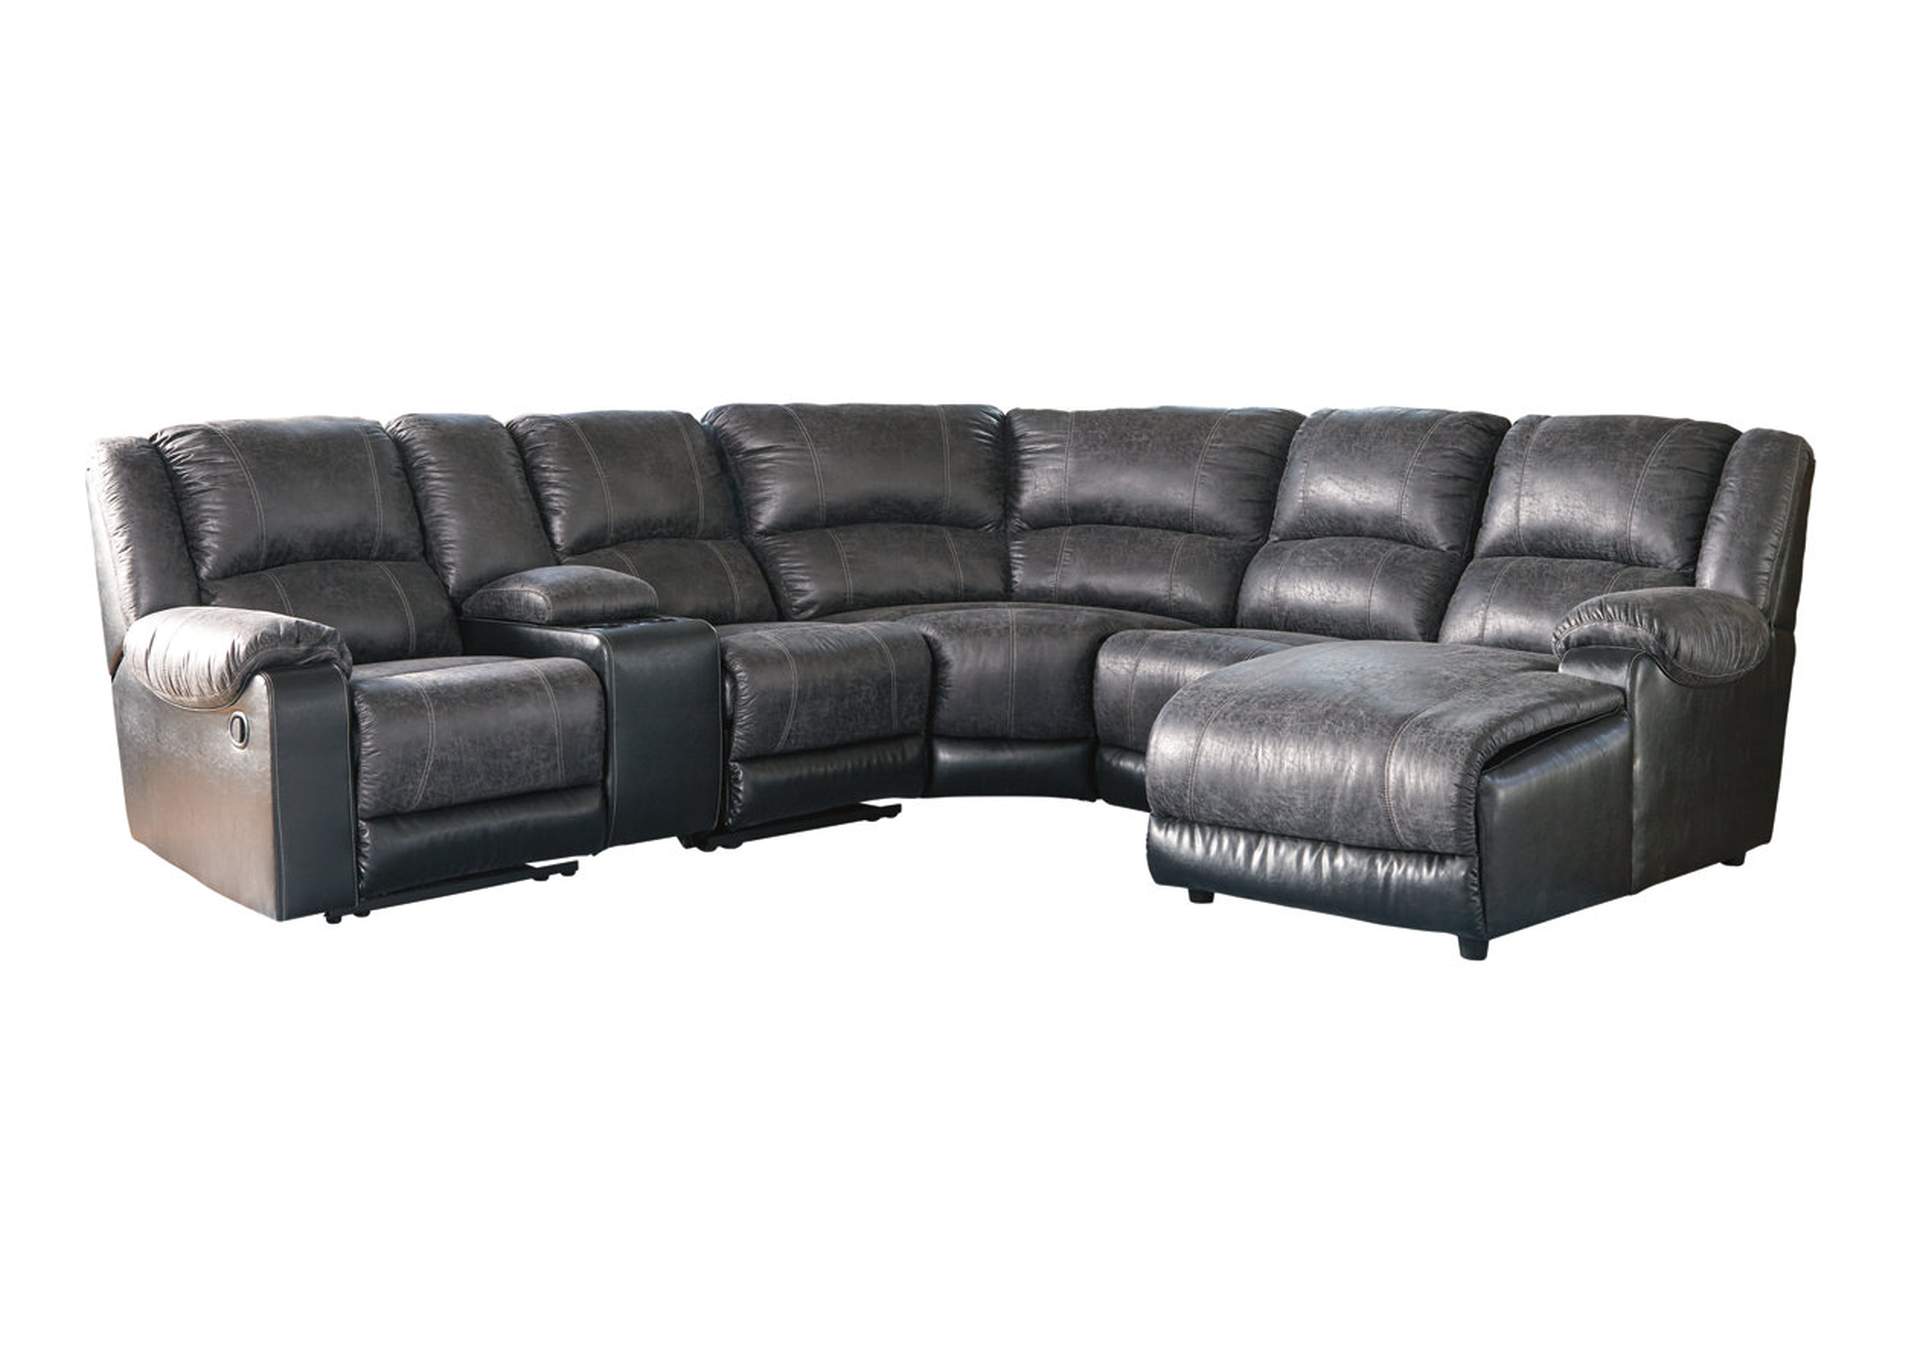 Nantahala 6-Piece Reclining Sectional with Chaise,Signature Design By Ashley